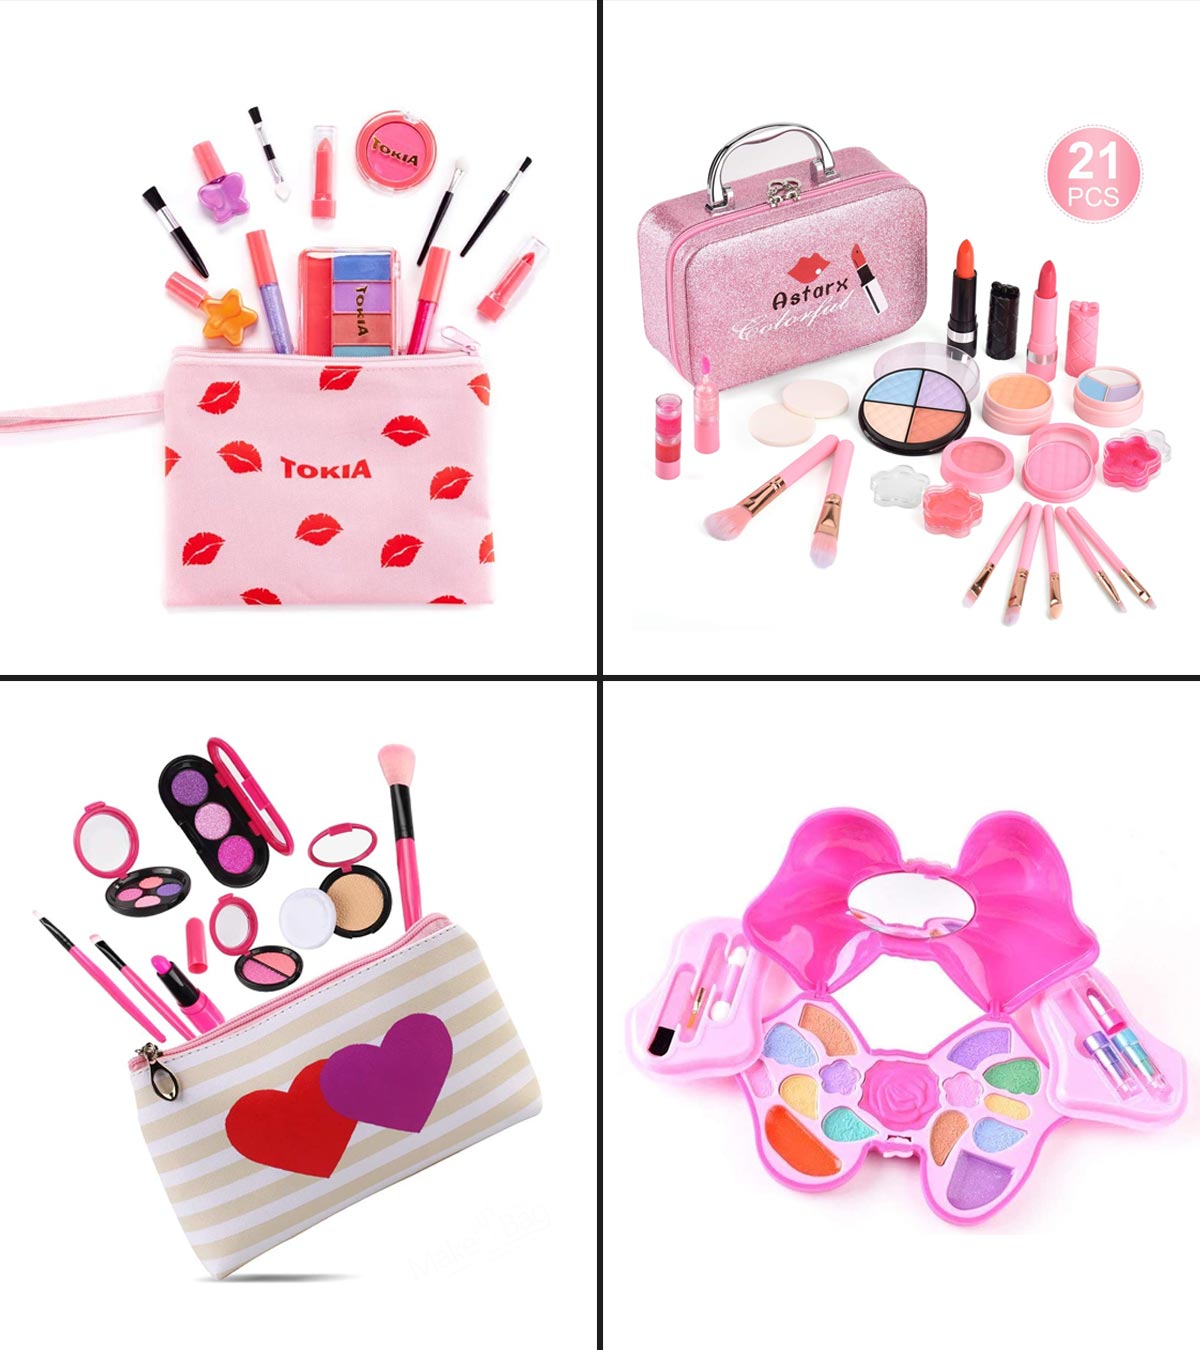 Pink Pretend Play Makeup Toy Set With Sound Makeup Bag, Cell Phone, Car  Key, Makeup Products Such As Lipstick & Mascara, Material